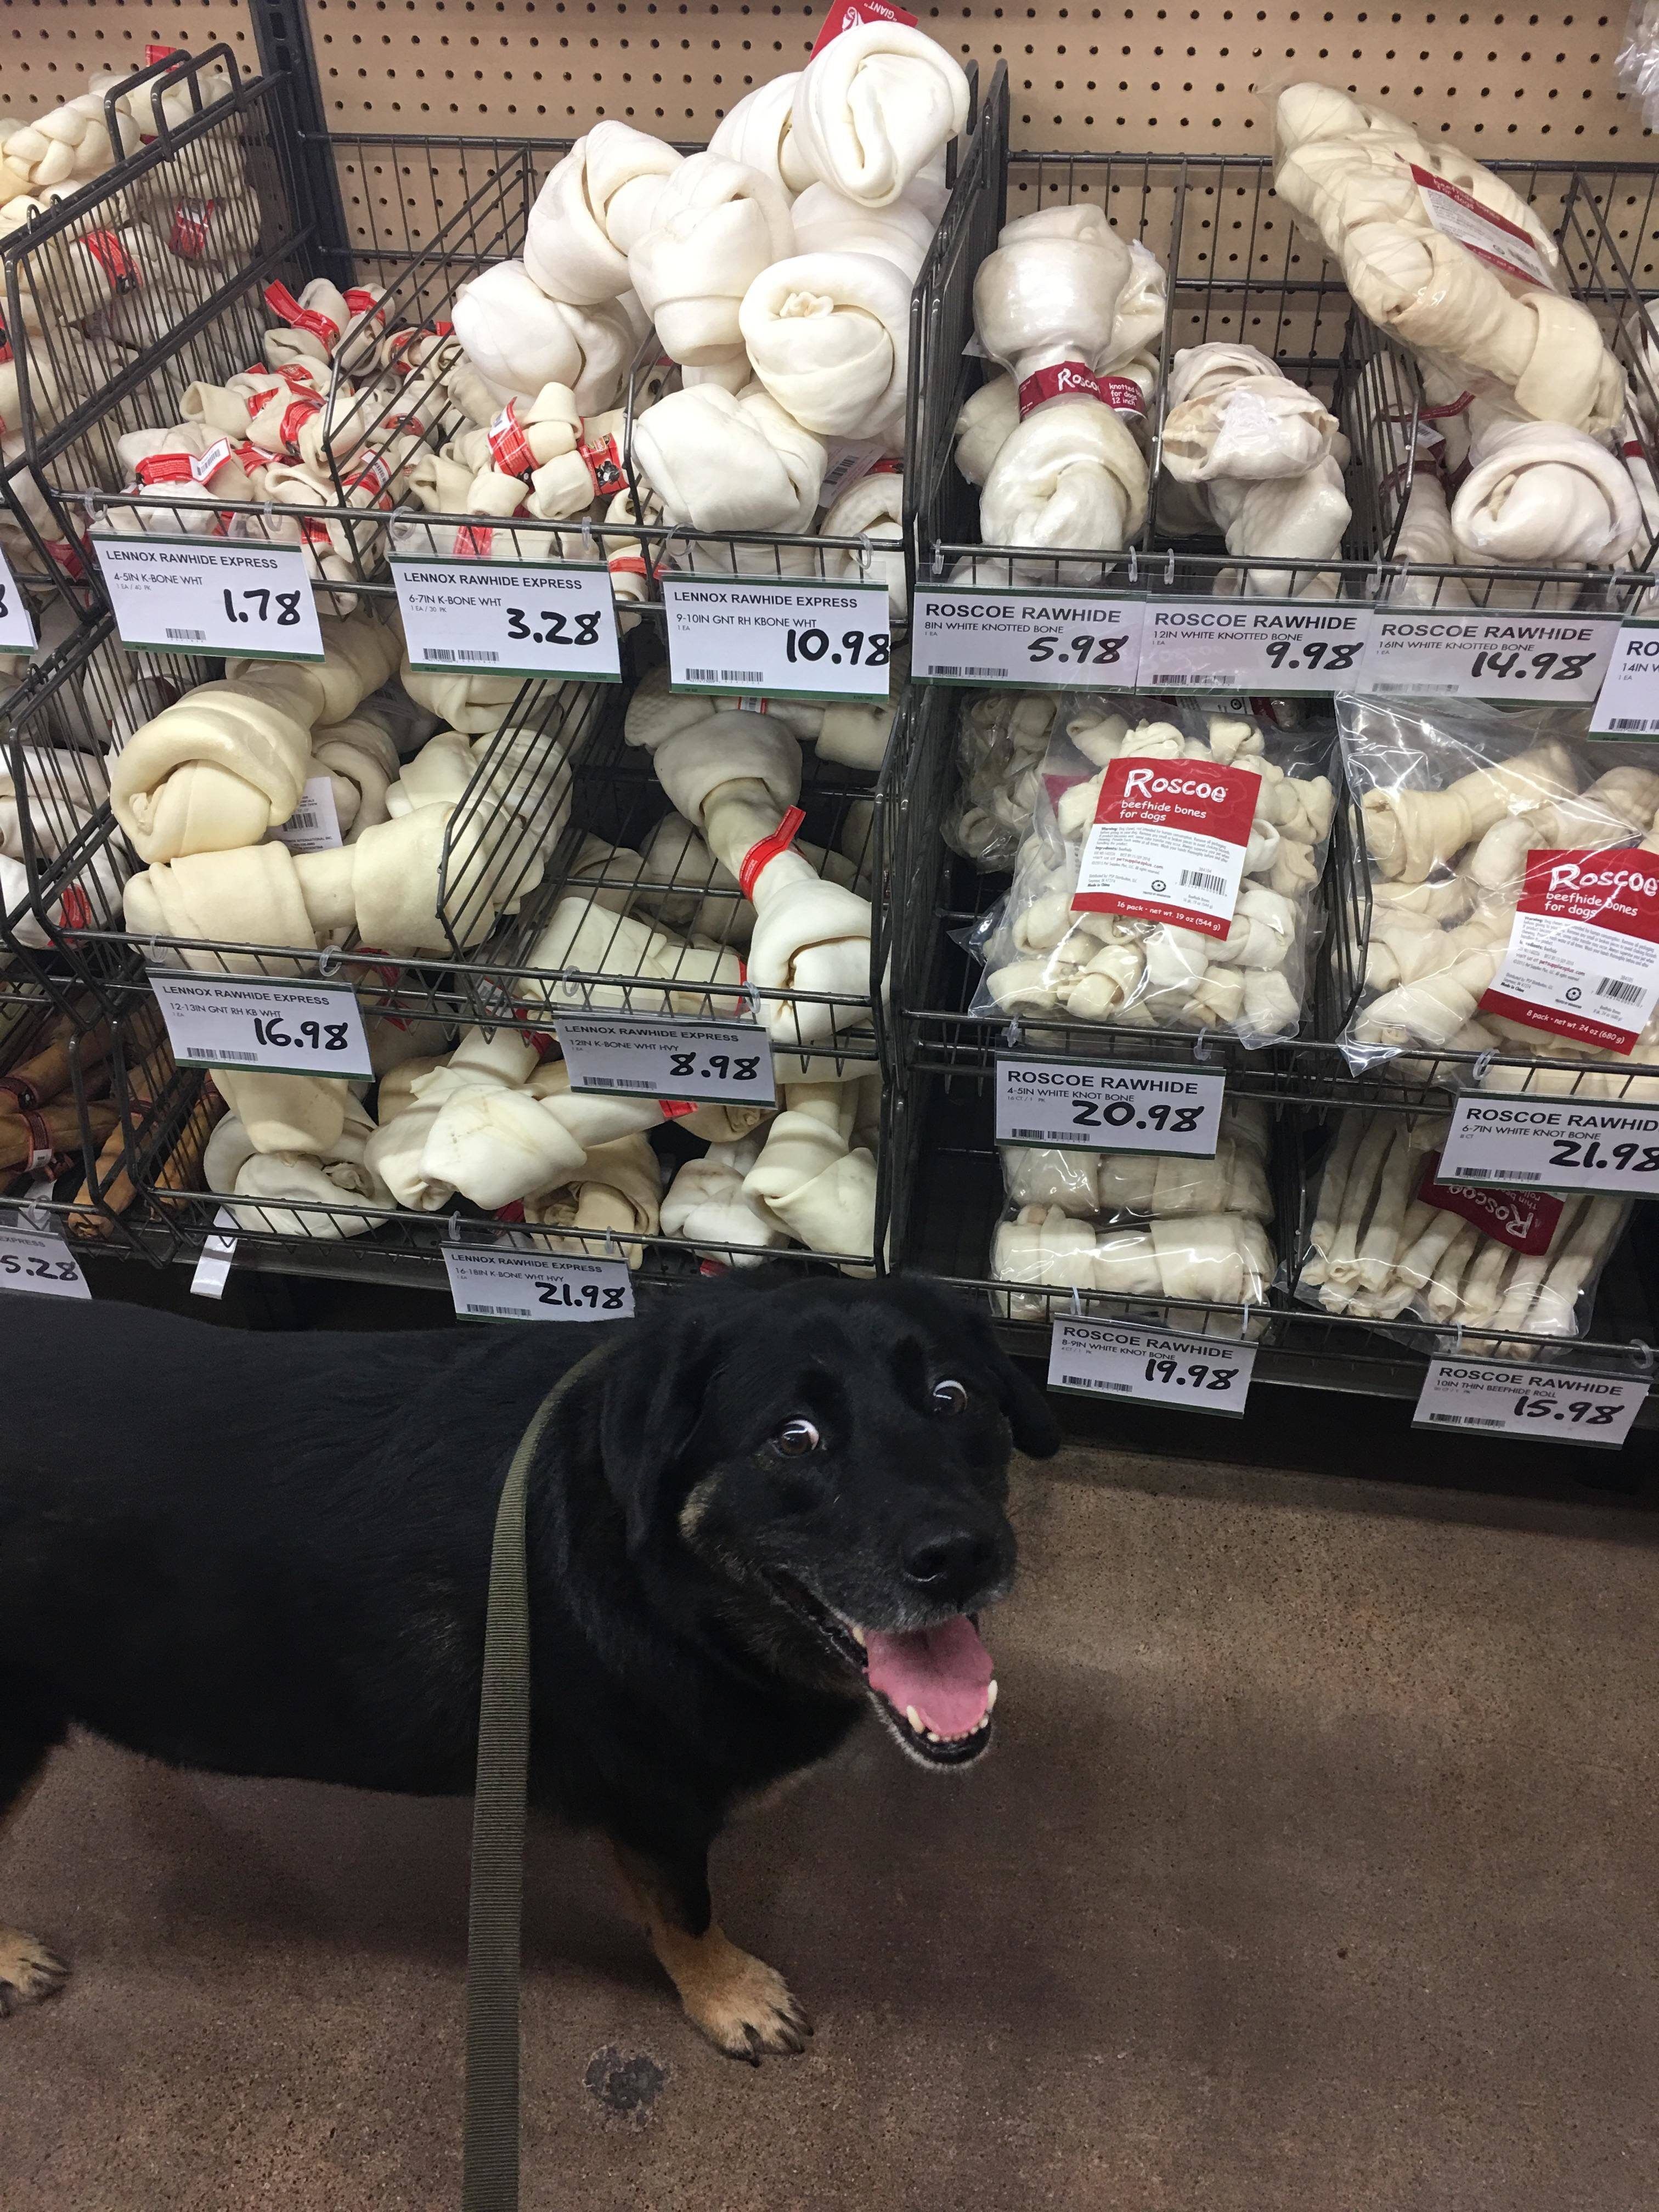 "CAN WE BUY THEM ALL???"